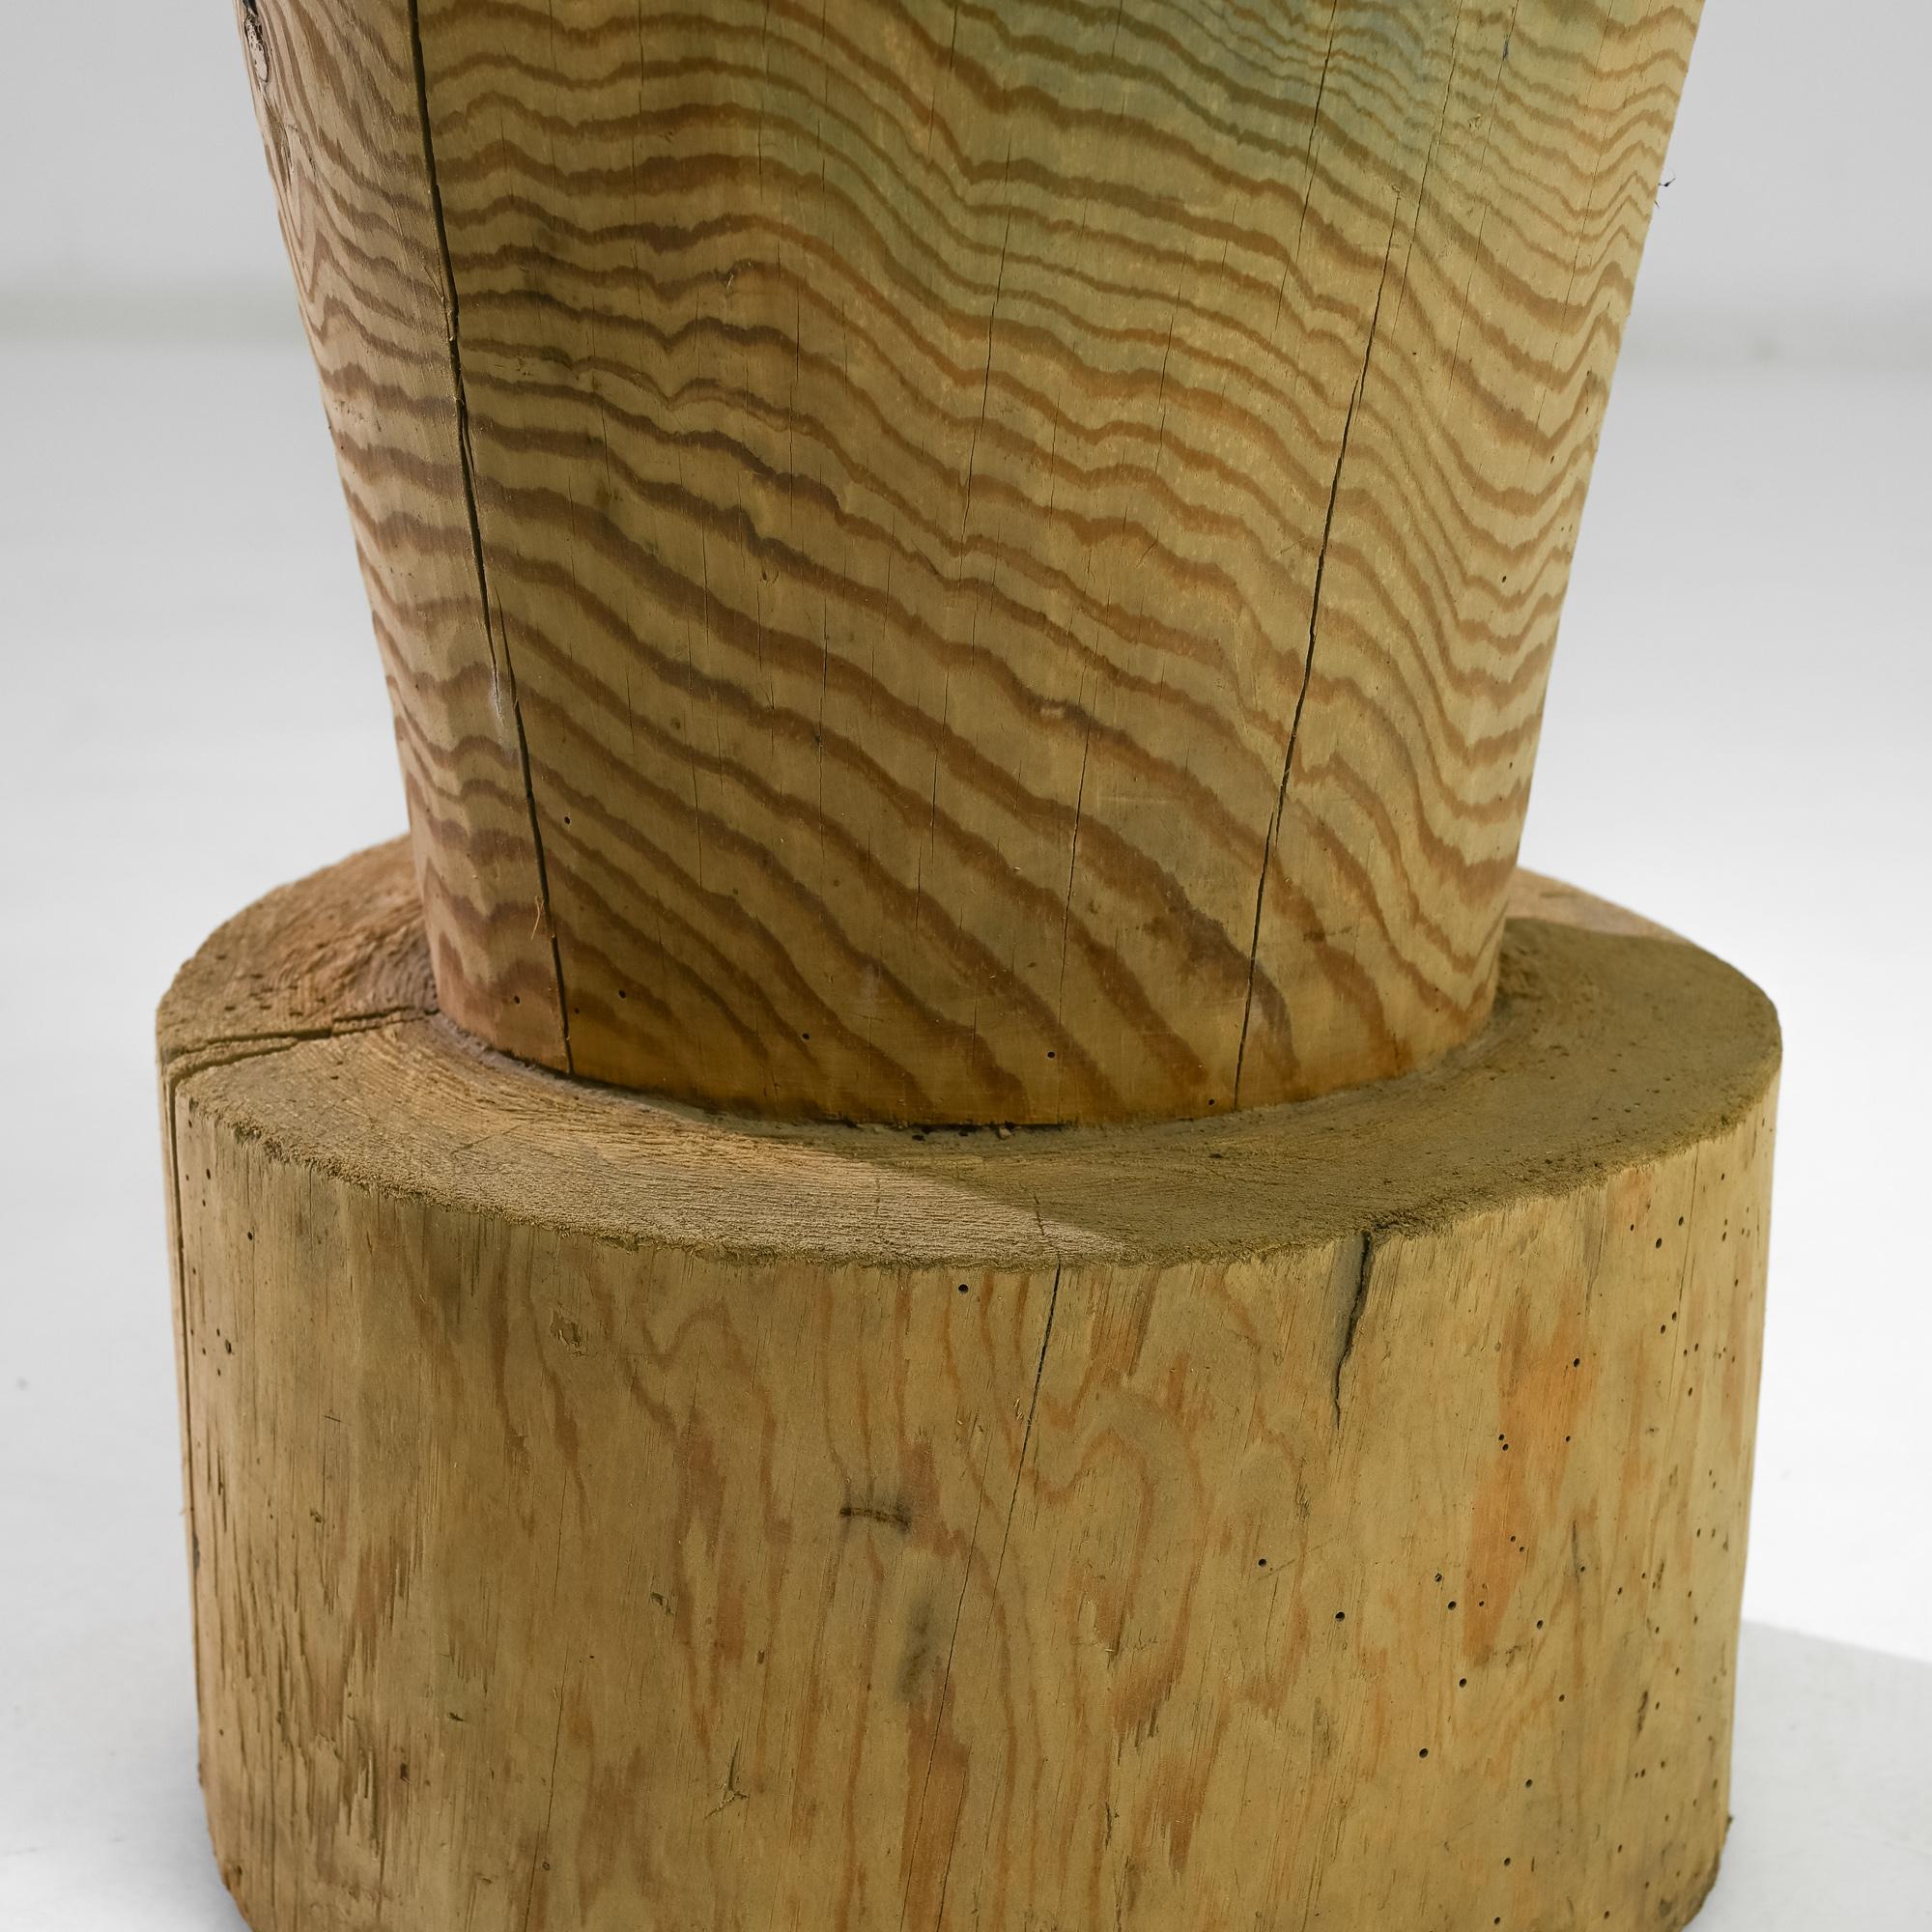 19th Century Central European Wooden Mortar and Pestle 6